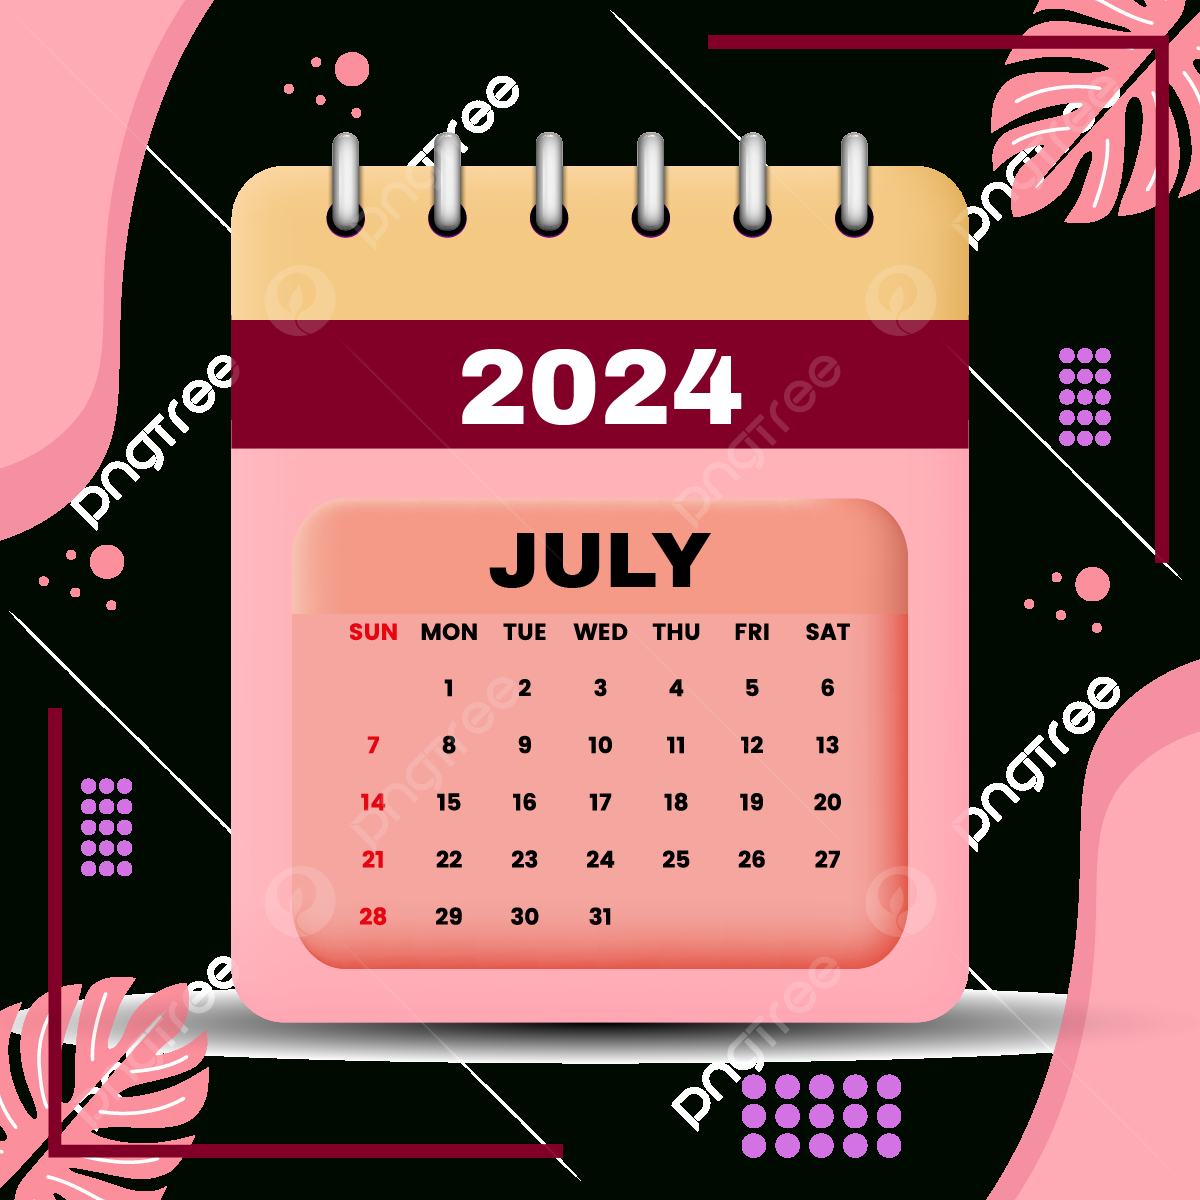 July 2024 Calendar Png, Vector, Psd, And Clipart With Transparent intended for July 2024 Calendar Clipart